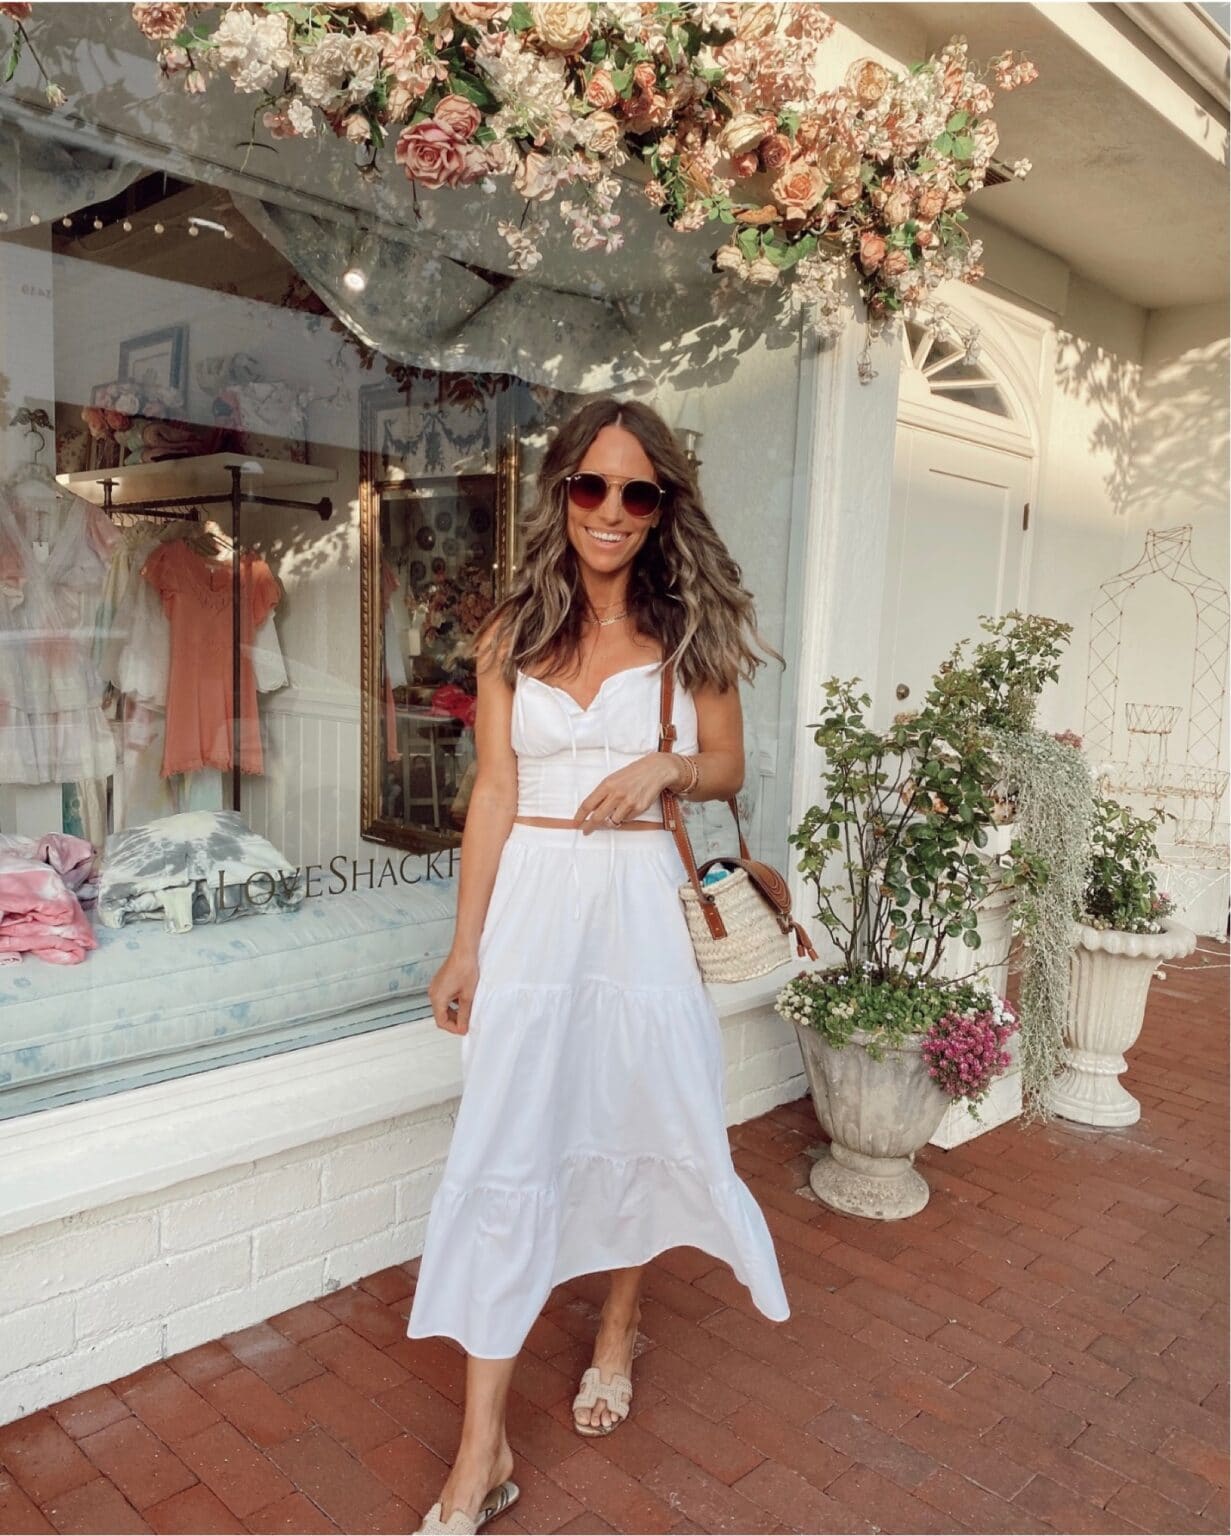 11 Easy Date Day/Night Outfits For Spring or Summer - Itsy Bitsy ...